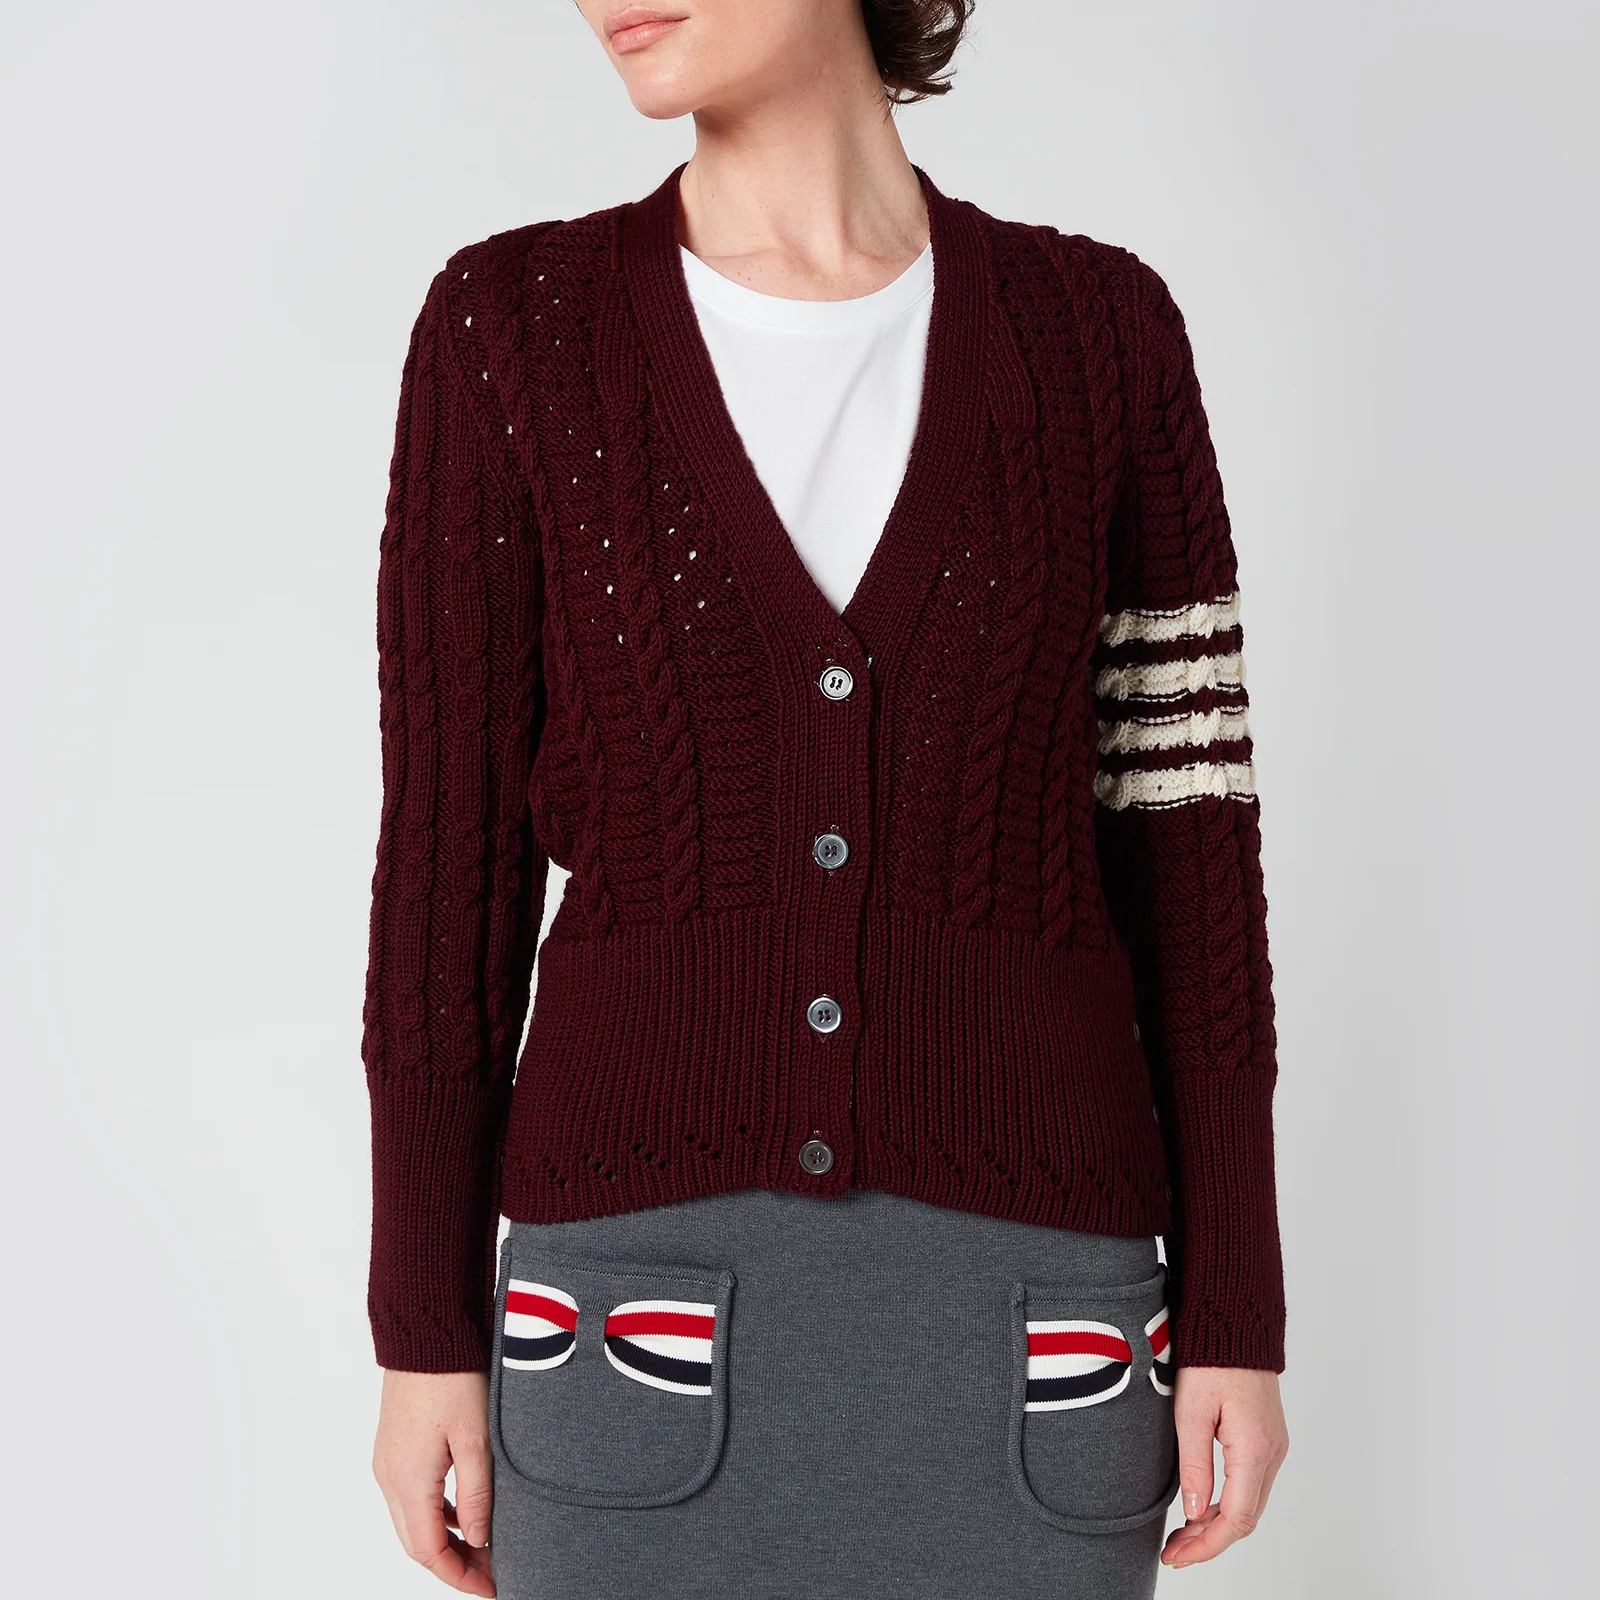 Thom Browne Women's Cable Classic Fit V Neck Cardigan With Stripes - Burgundy Image 1